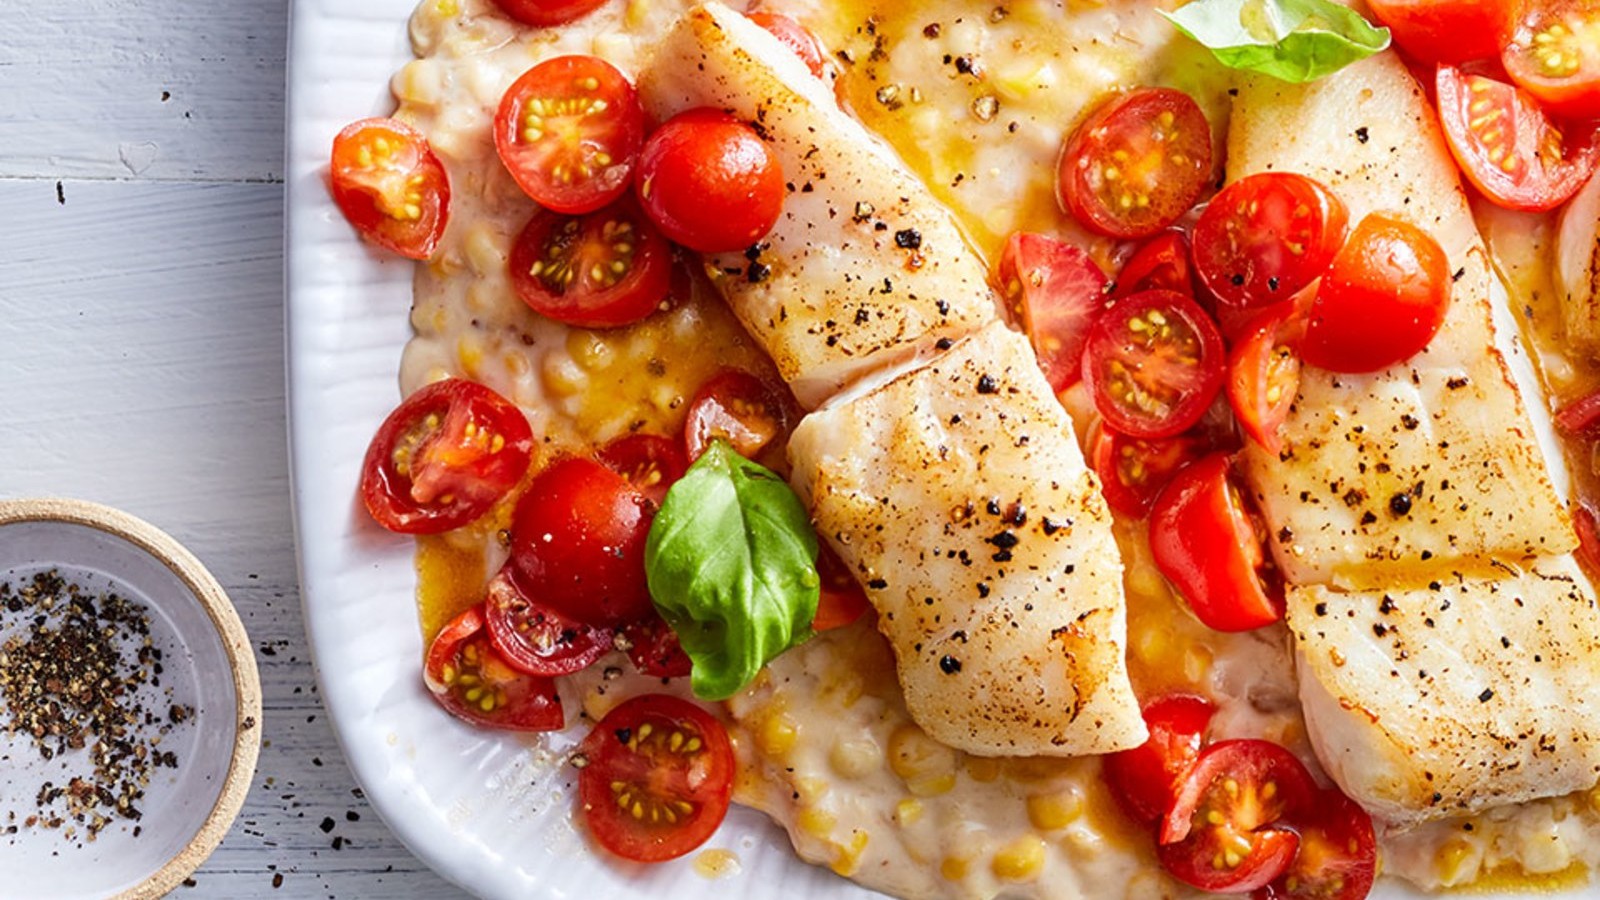 Image of Pan-Seared Halibut with Creamed Corn & Tomatoes